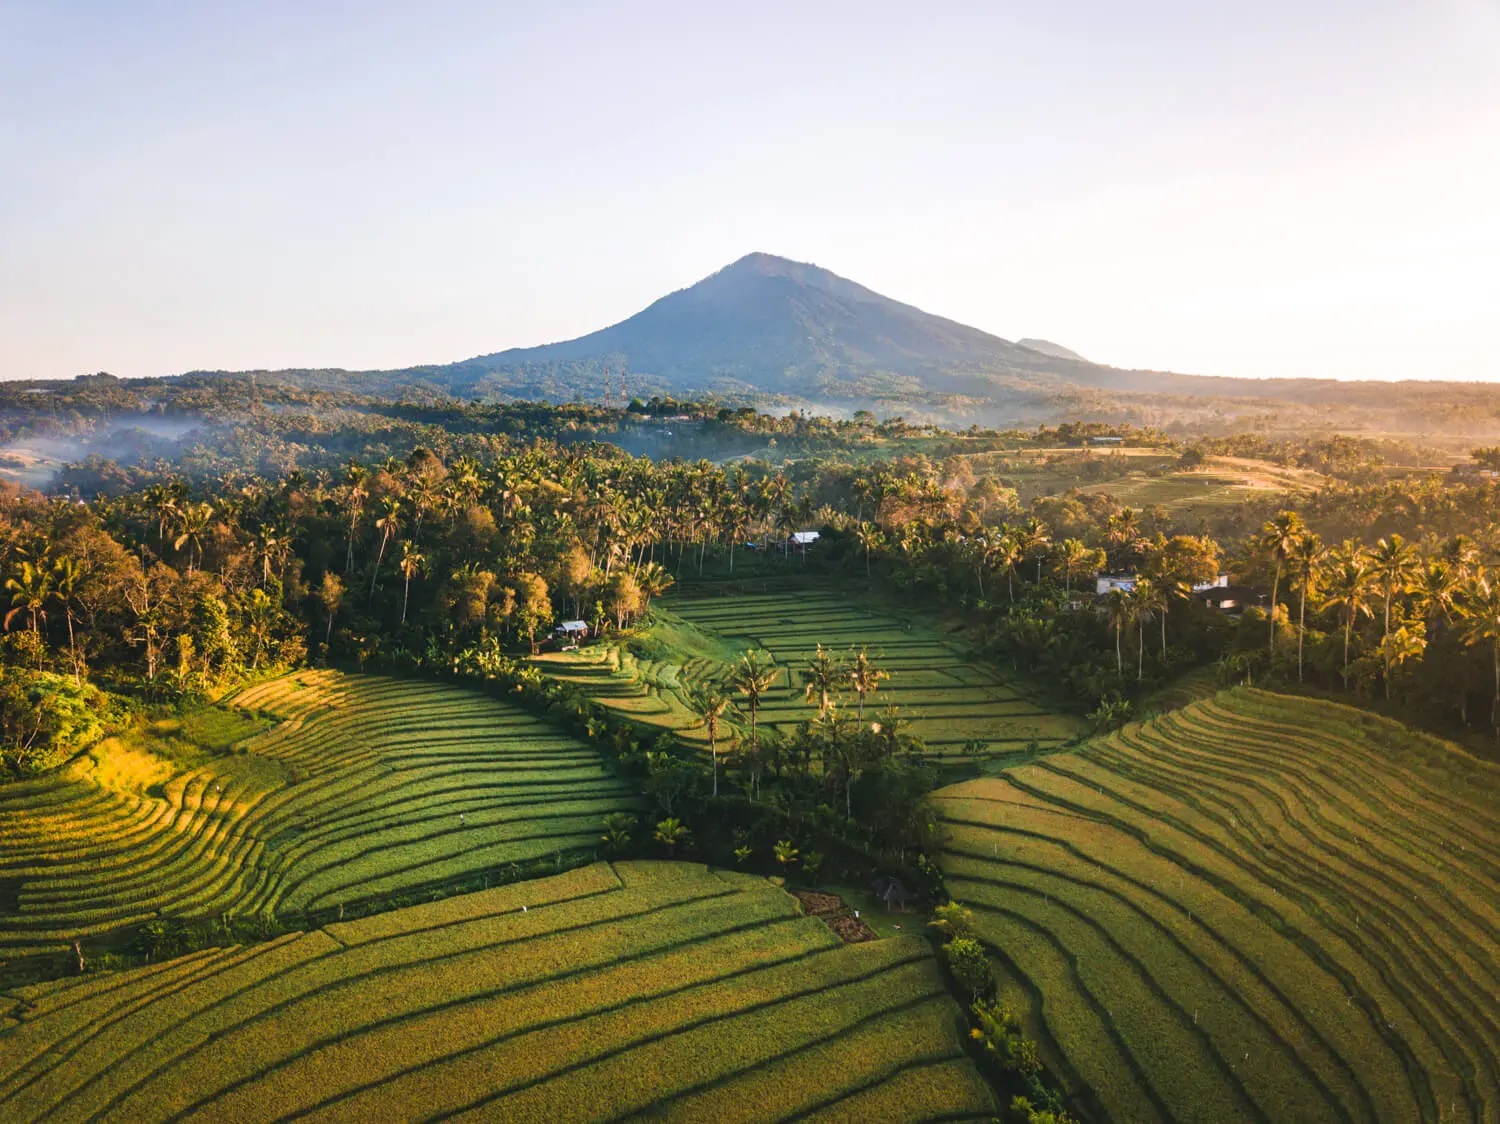 Pupuan Rice Terrace and North Bali Tour